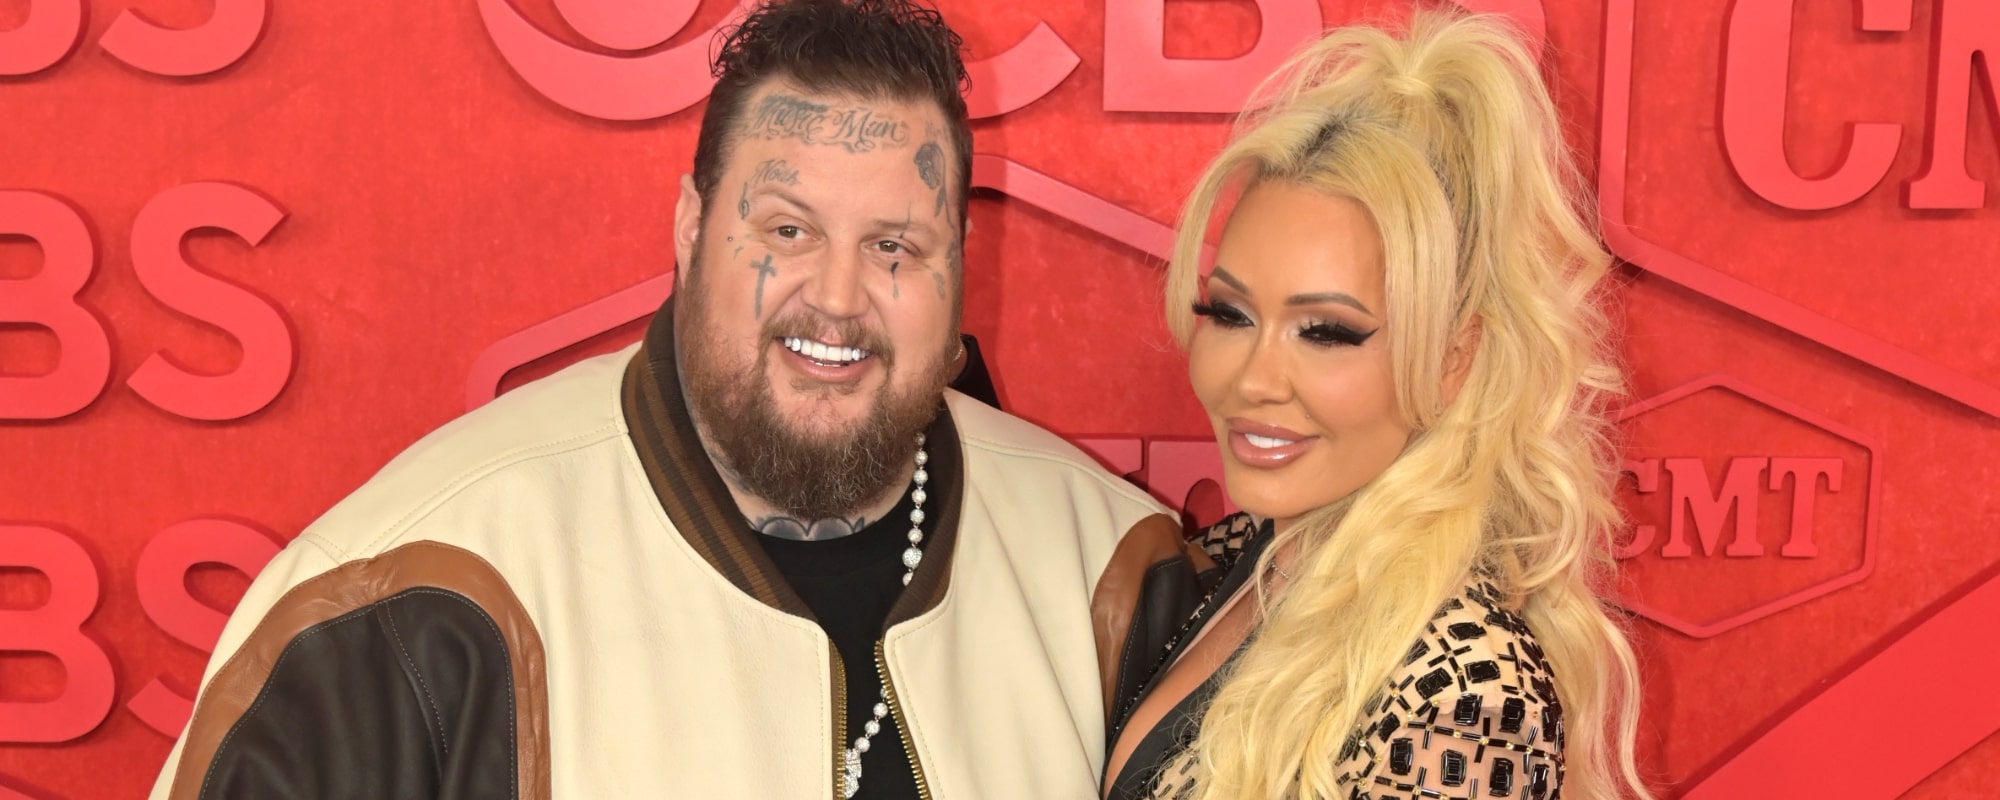 Jelly Roll and Bunnie Xo at the CMT Music Awards